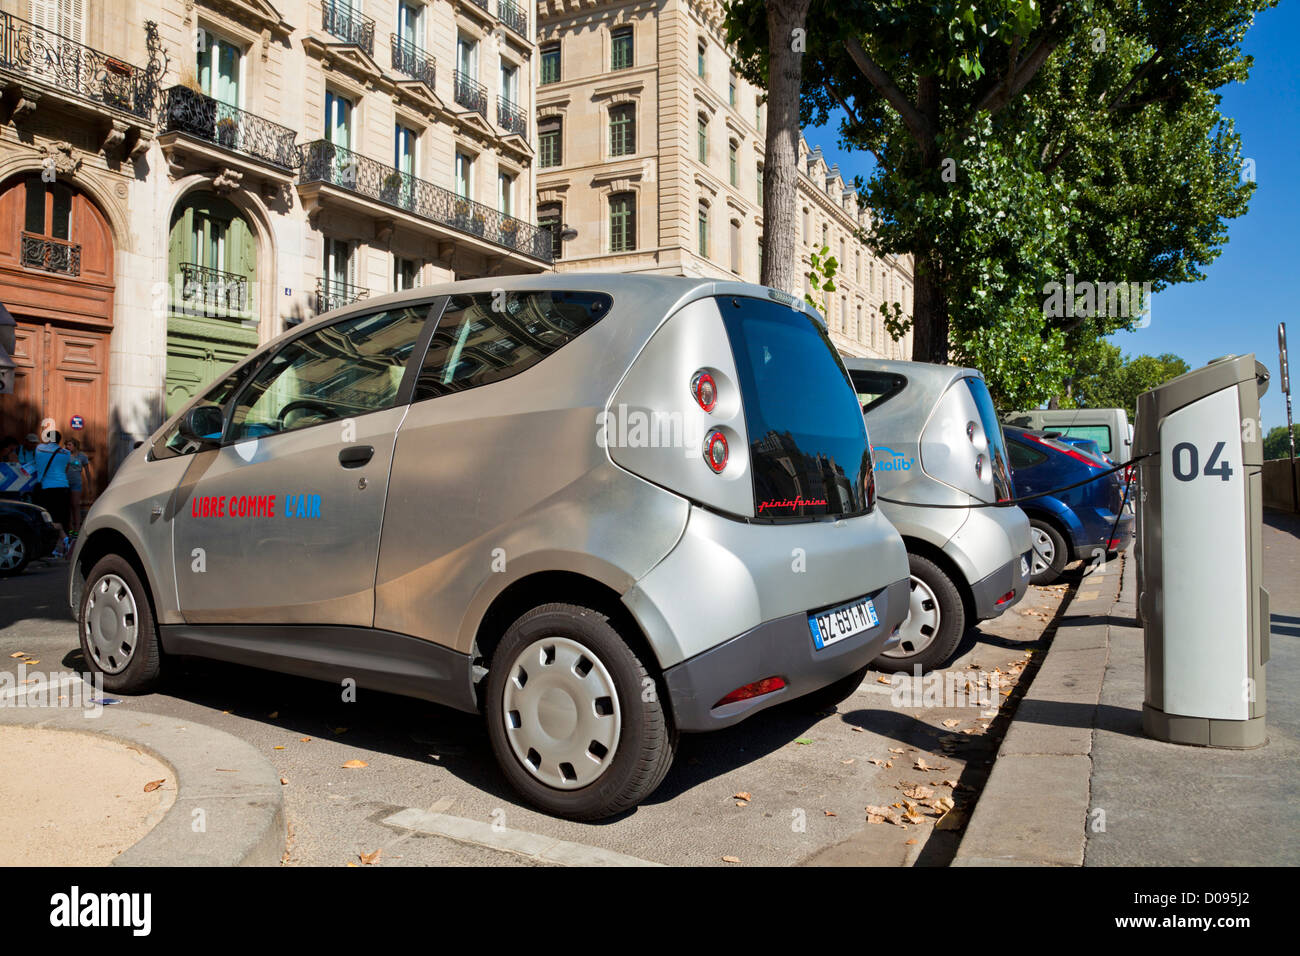 Autolib bluecar designed by Pininfarina at the electric car-sharing scheme charging station point Paris France EU Europe electric car charger Stock Photo